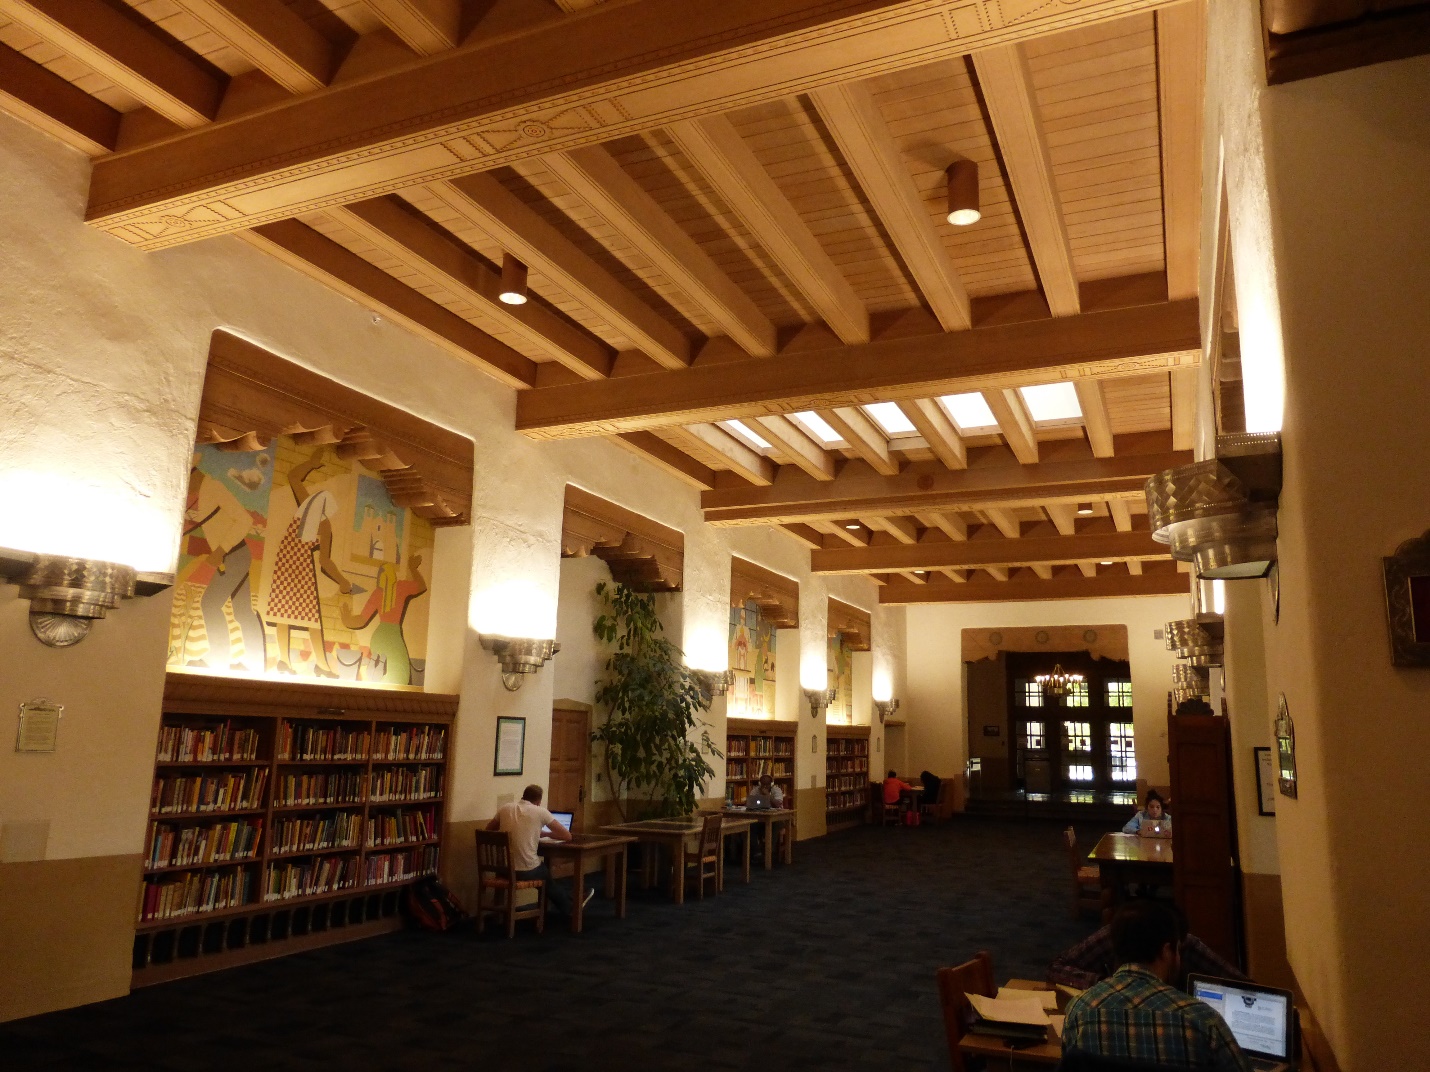 New Mexico - Zimmerman Library at UNM